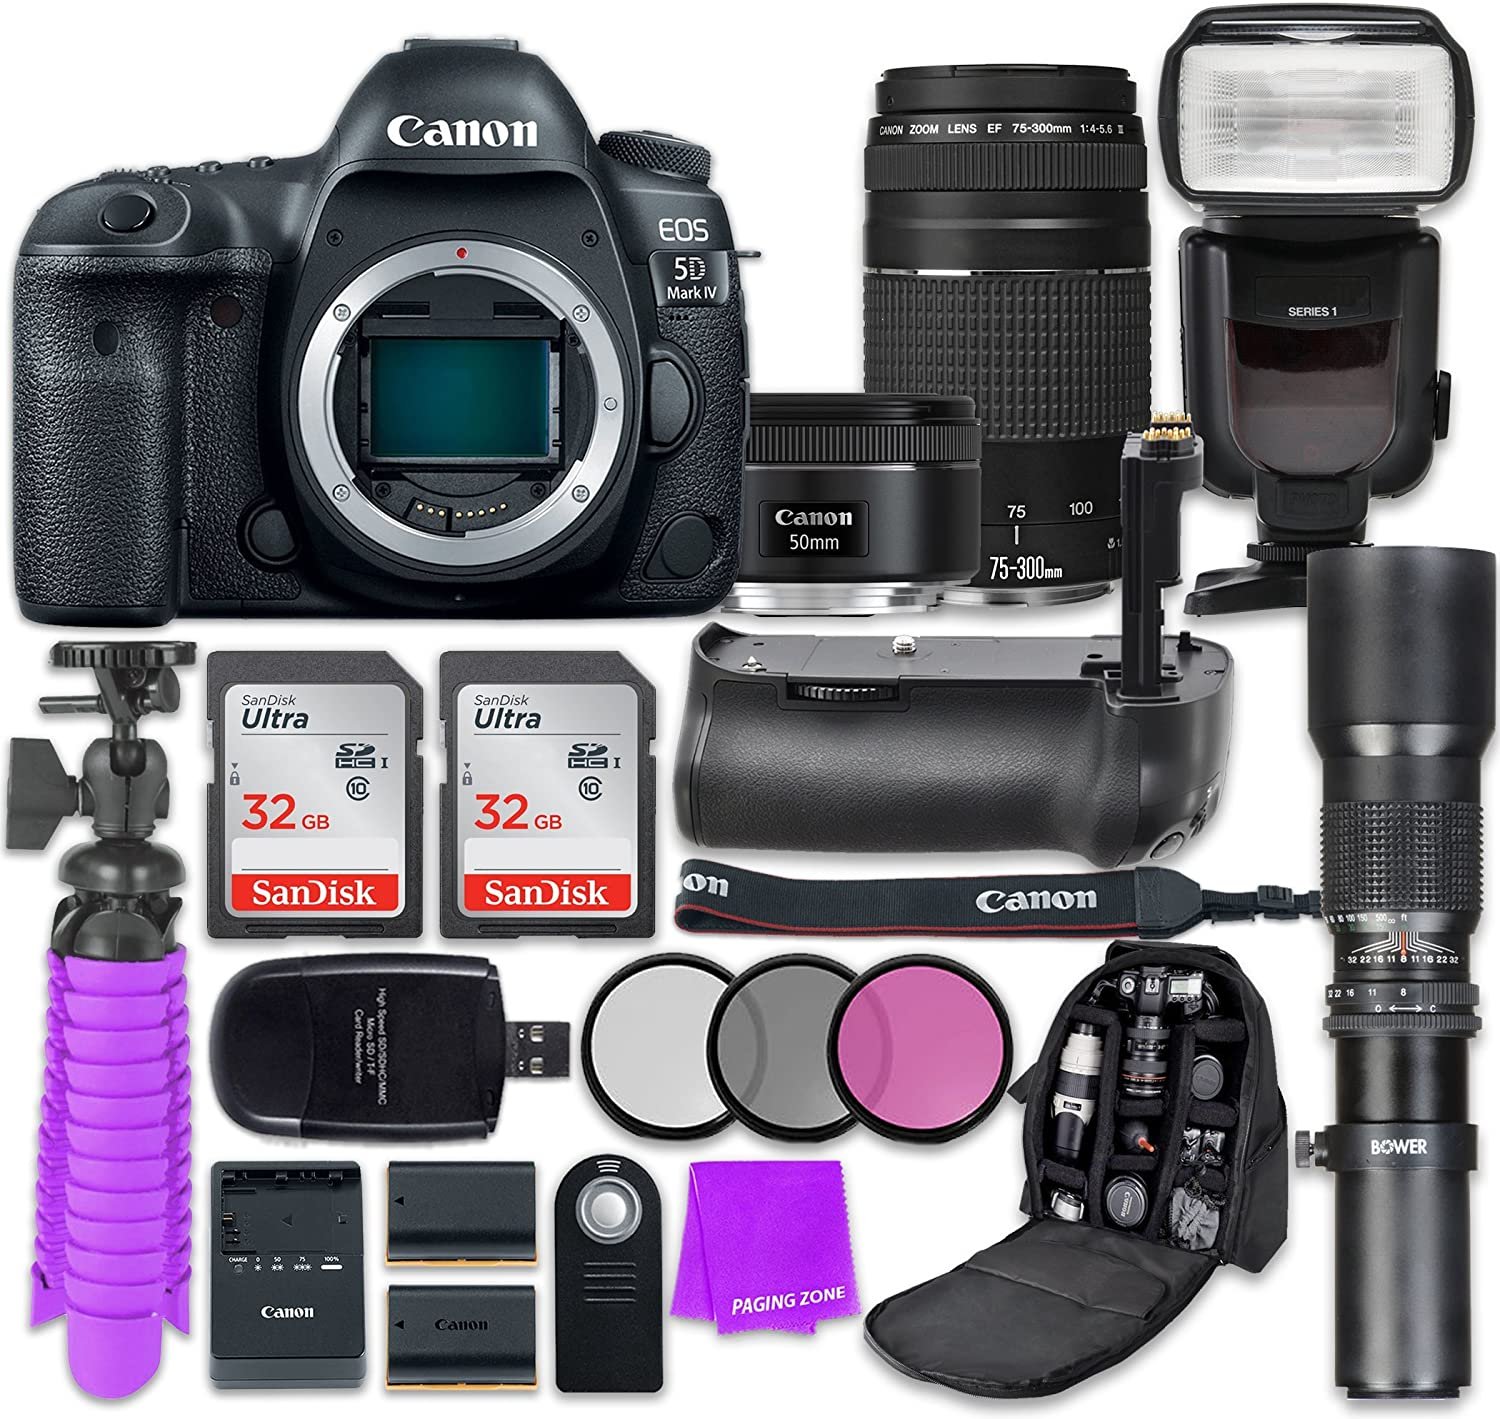 Canon EOS 5D Mark IV DSLR with EF 50mm F/1.8 STM & 75-300mm F/4-5.6 III Lenses - New, Wi-Fi Enabled Accessory Bundle - image 1 of 4